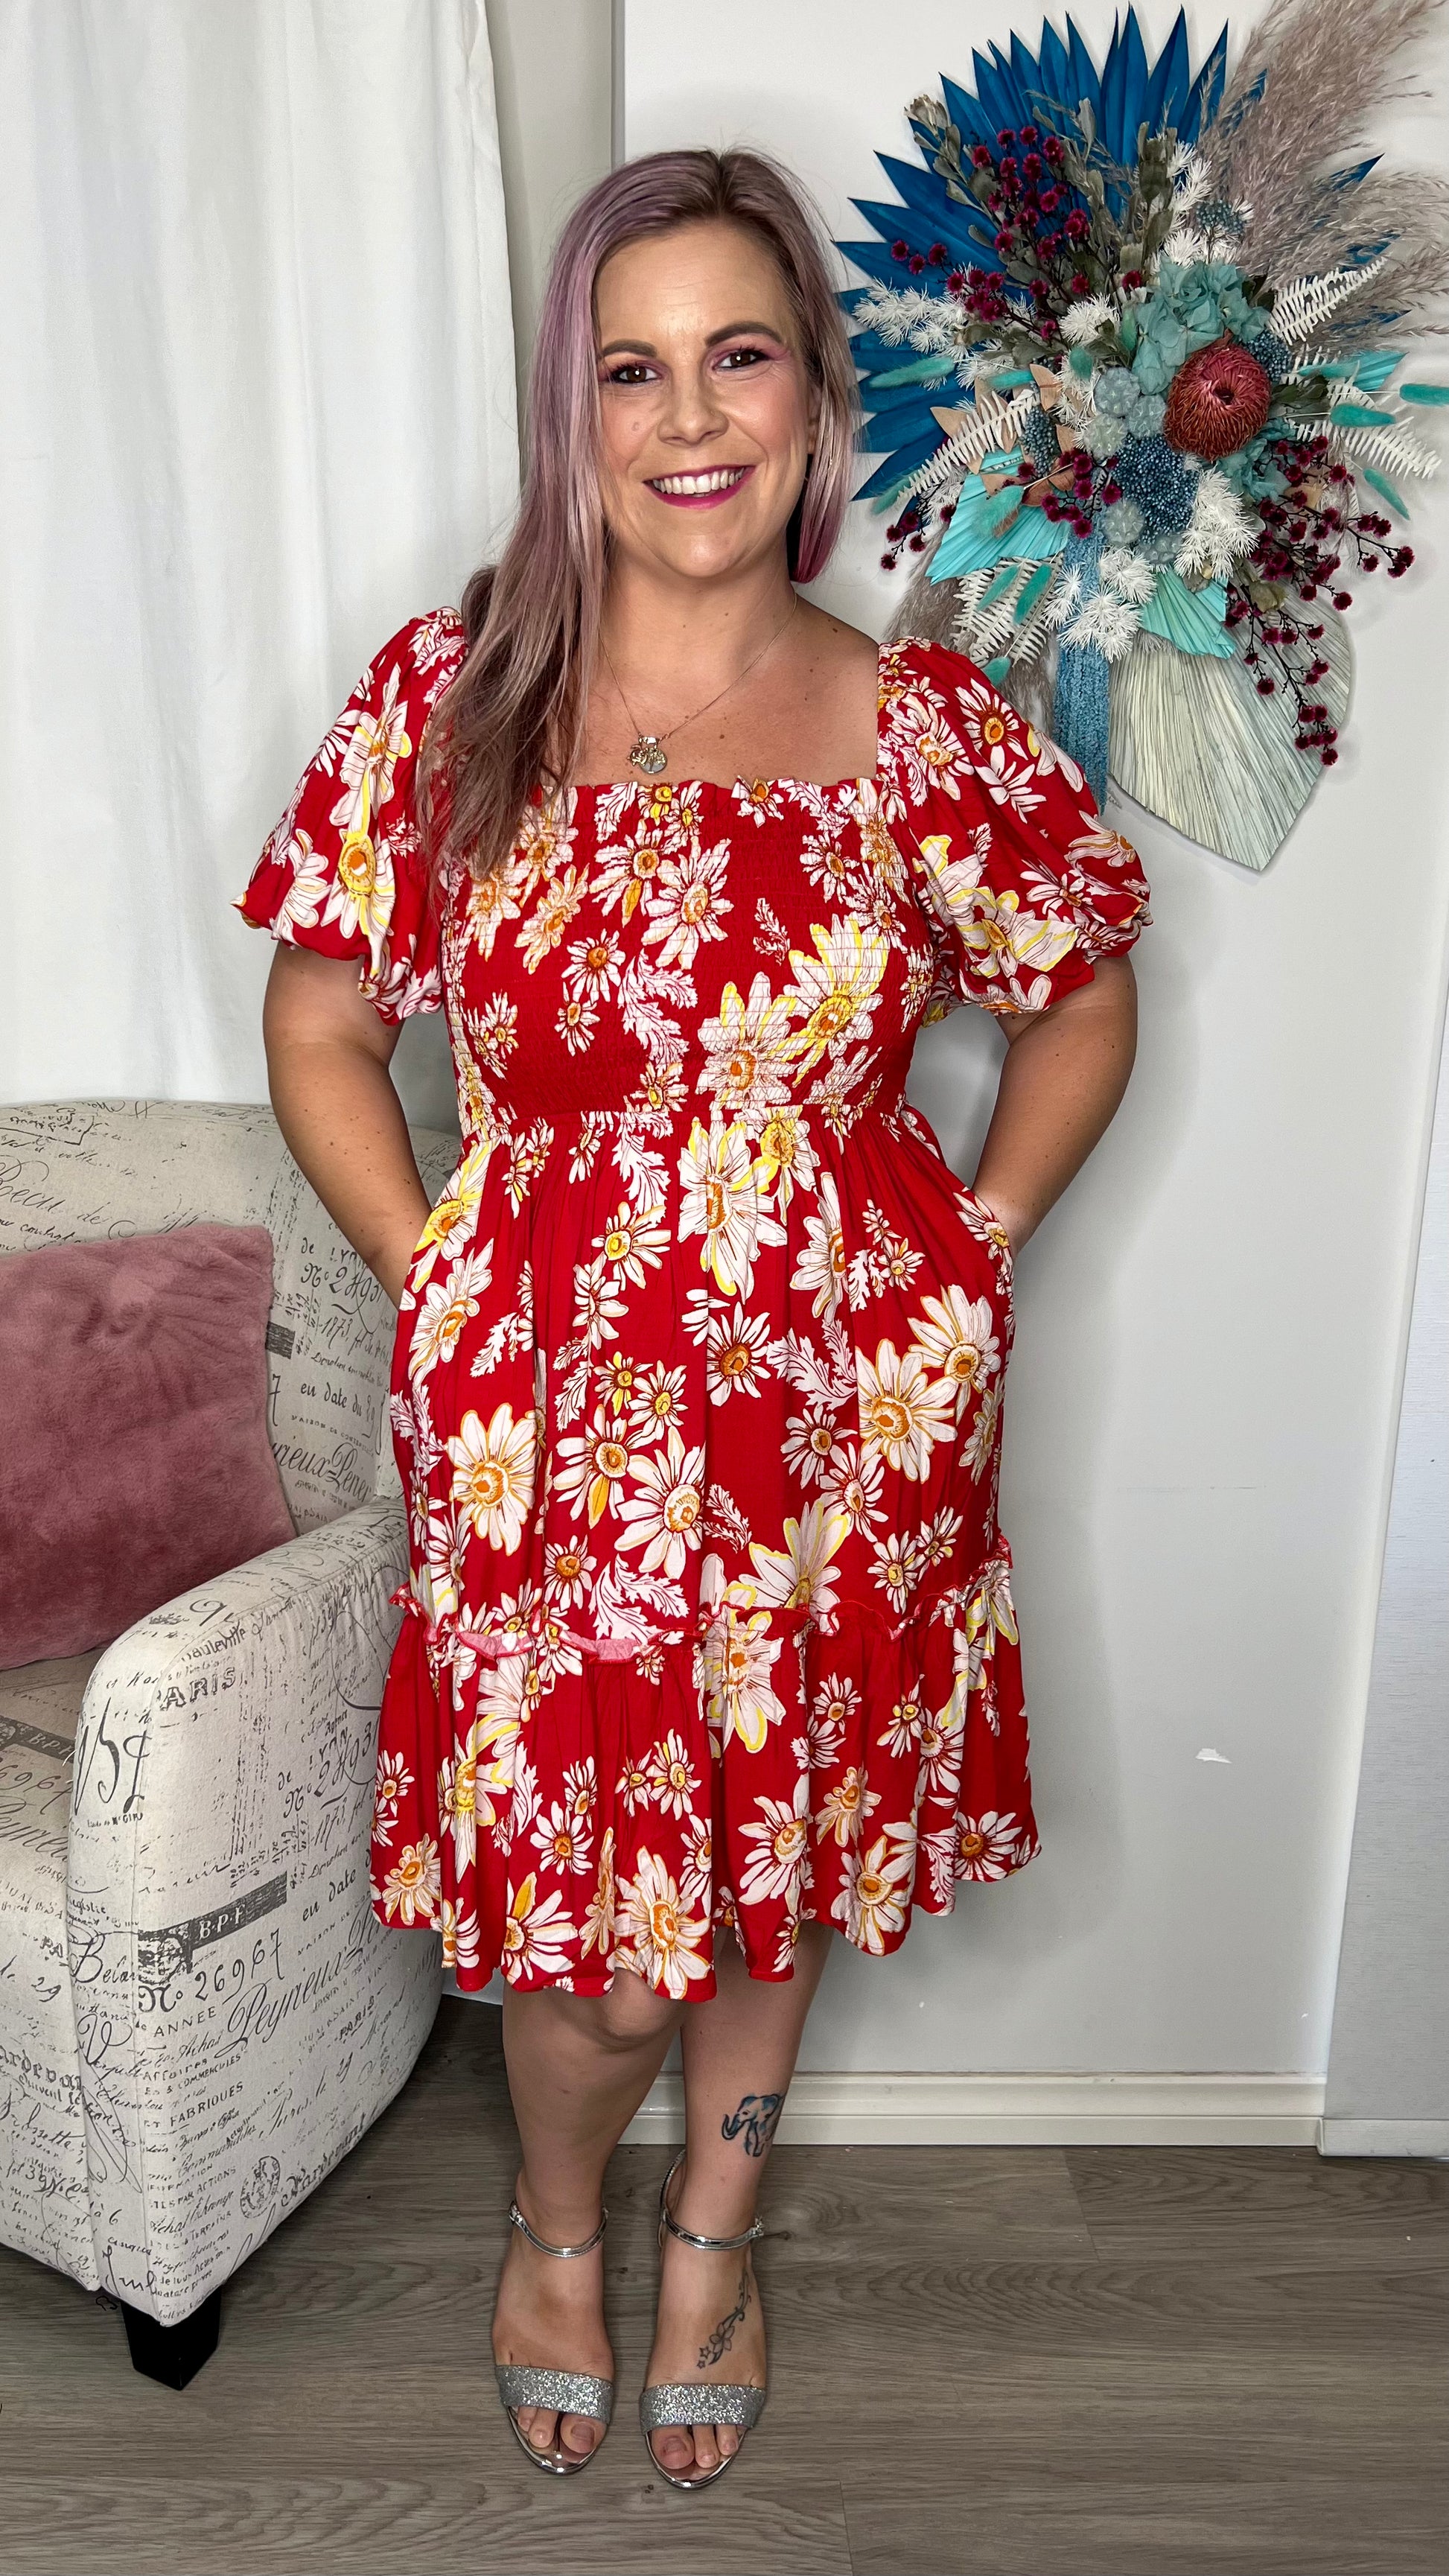 Ruby Dress - Red Floral: The Ruby dress is a super cute mini with gorgeous puff sleeves, giving it a beautiful shape

Shirred bodice
Elasticated sleeves
Mini length
Pockets
True to size
Dani - Ciao Bella Dresses 